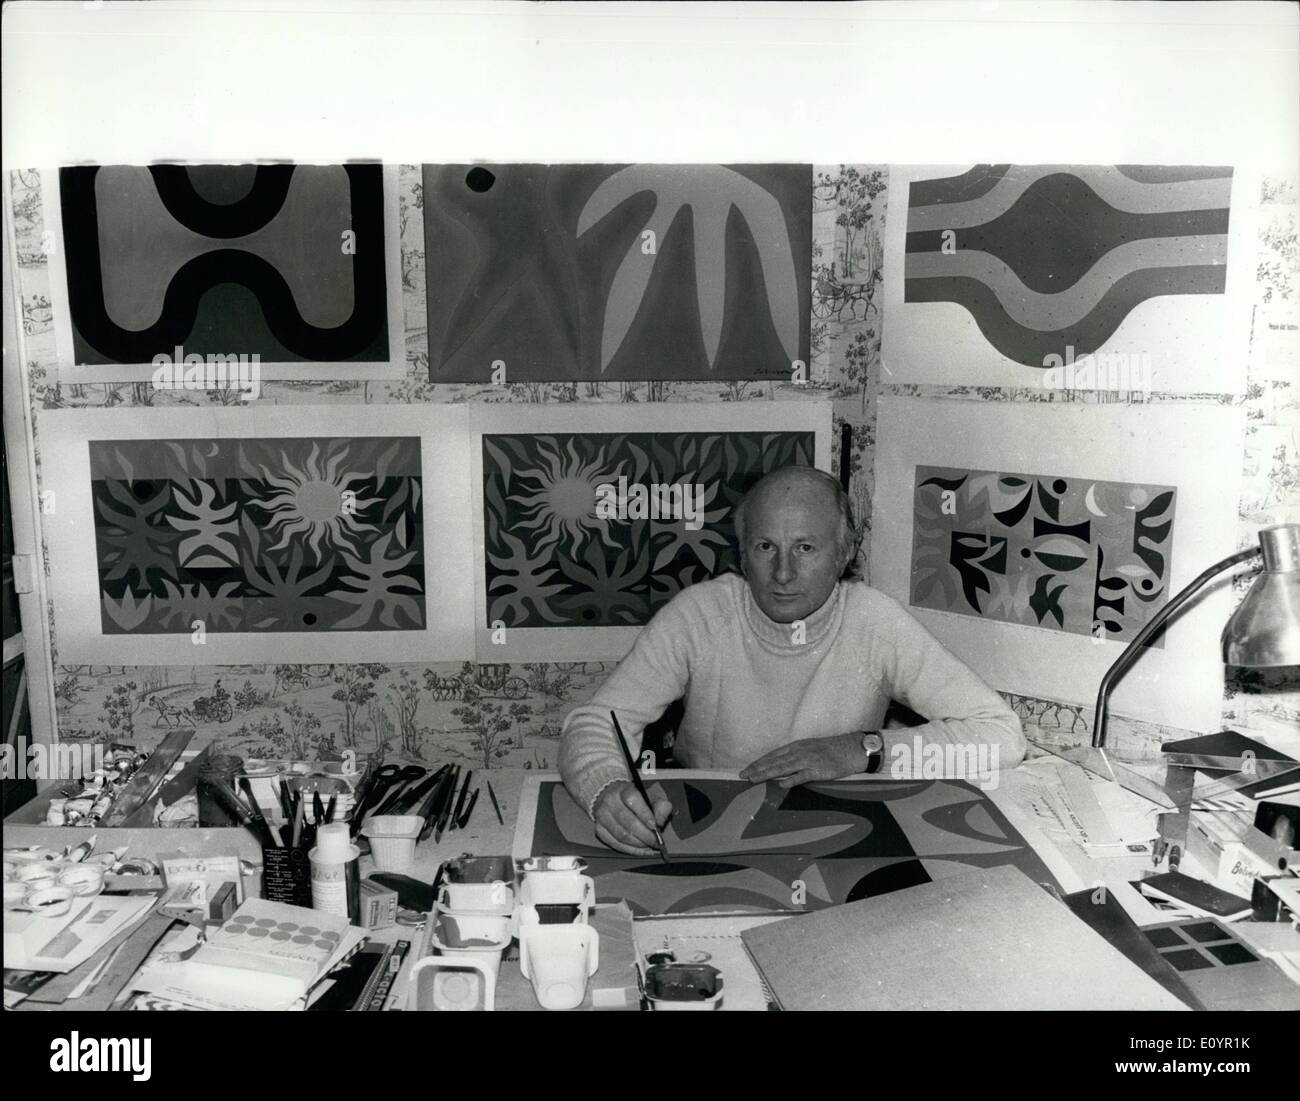 Mar. 03, 1971 - Curtains of sun and moon for Sydney Opera house.: John Coburn, Australian artist, is now at work in his Paris studio designing two tapestry curtains for the Sydney Opera house. One is ''The Curtain of the Sun'' - height 27 feet (830cm), width 52 feet (1600cm) - for the Opera theatre, in rich reds, yellows, pinks and browns; abstract shapes based on organic forms representing the elements of fire, earth, air and water dominated by a huge heraldic sun. The rays of the sun will have gold thread woven in with the yellow wool Stock Photo